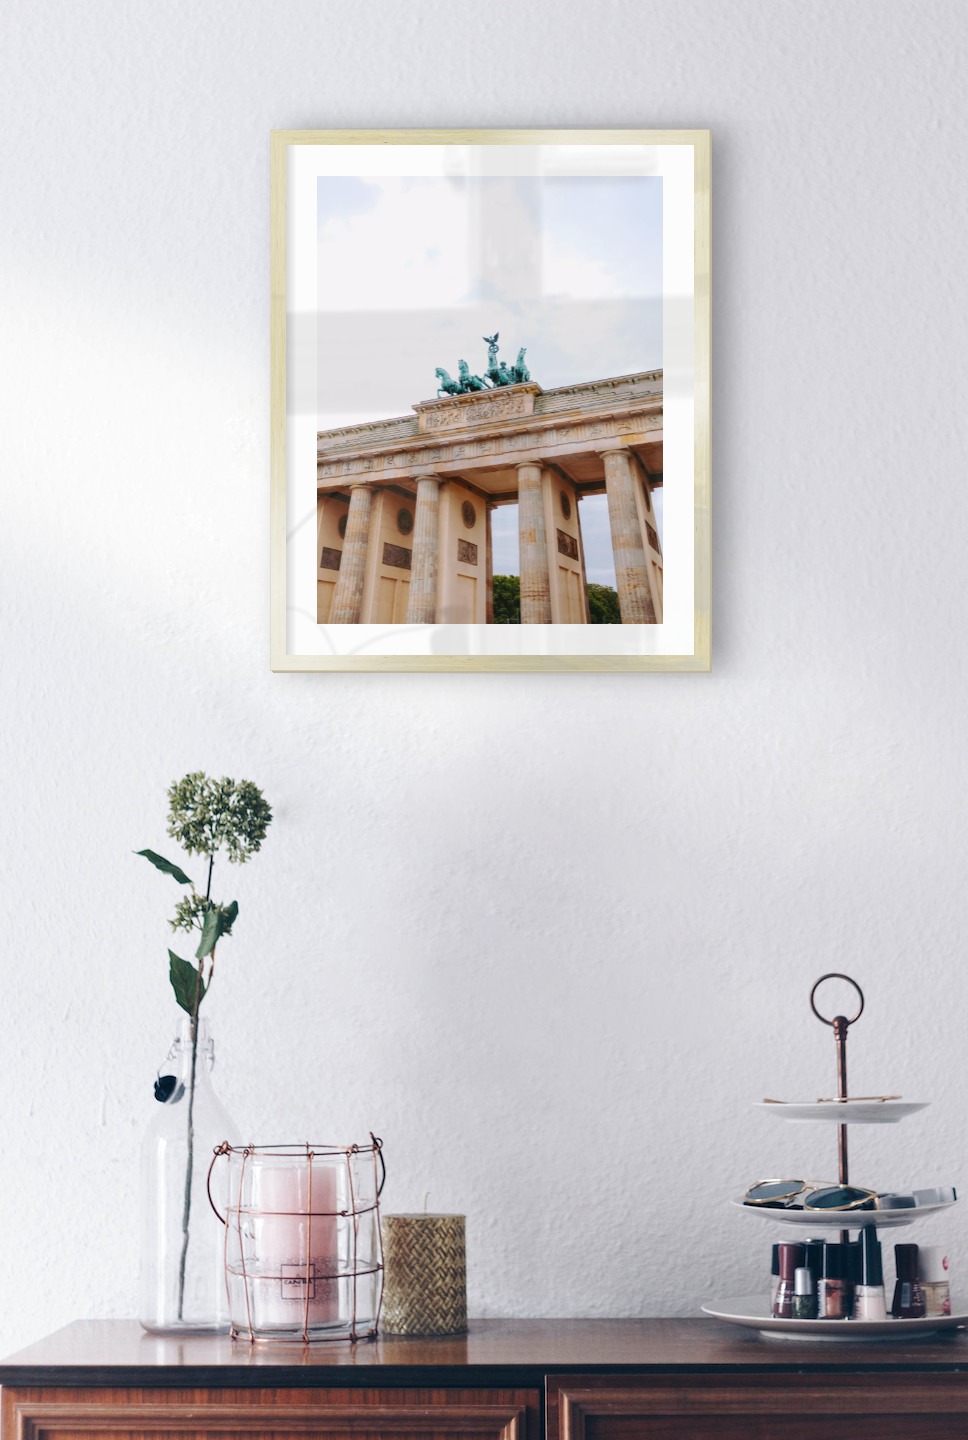 Gallery wall with picture frame in gold in size 40x50 with print "Berlin"